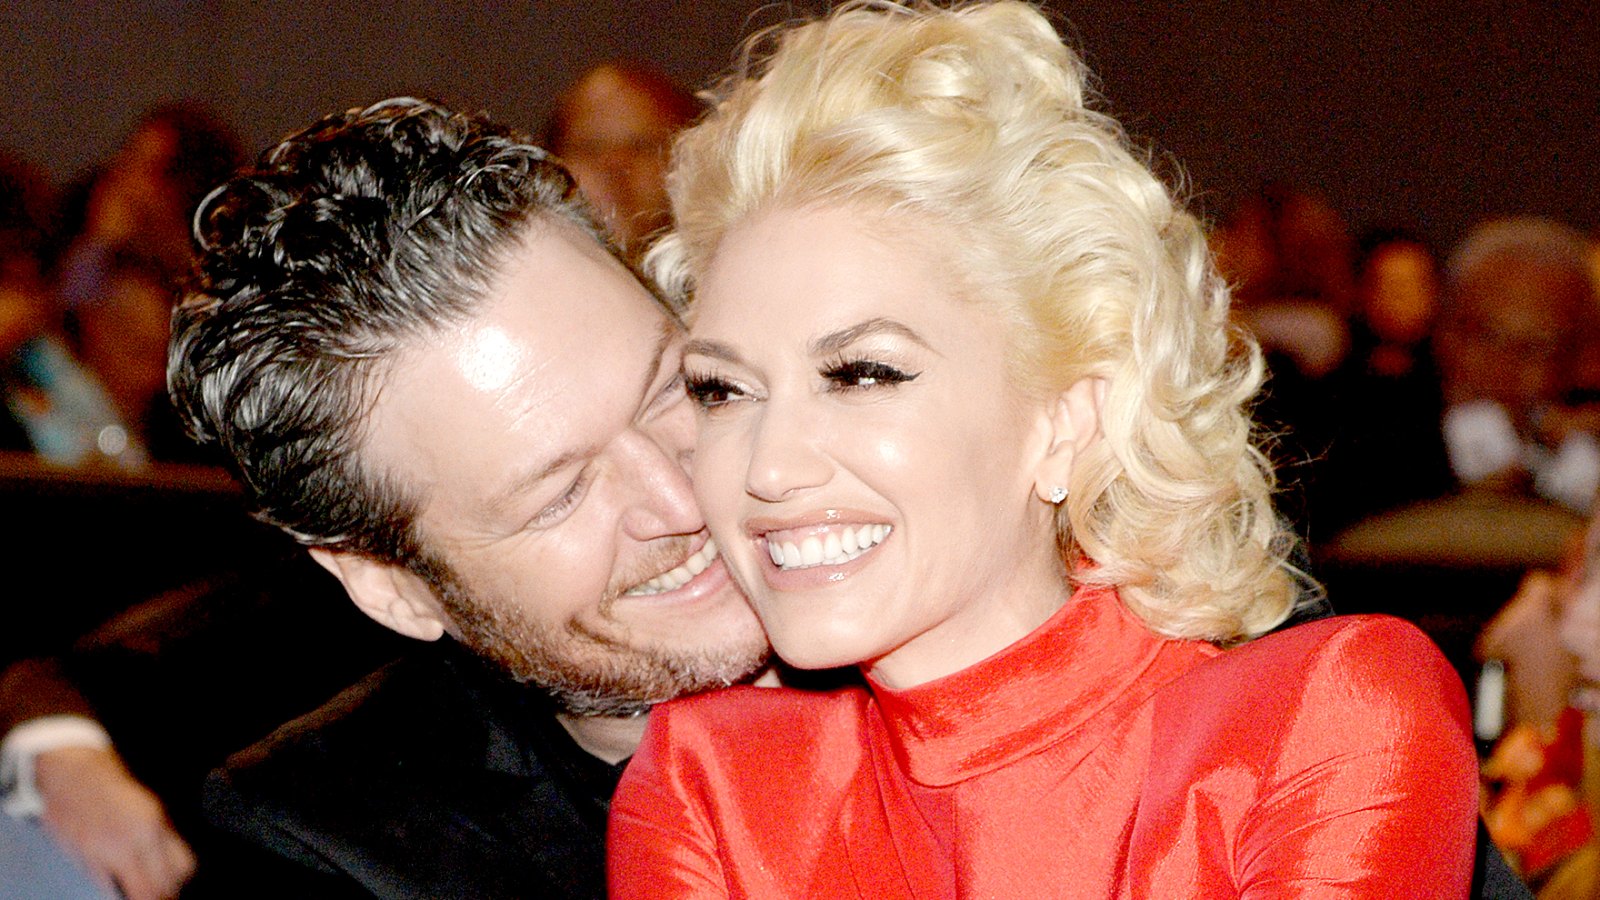 Blake Shelton and Gwen Stefani attend the 2016 Pre-GRAMMY Gala and Salute to Industry Icons honoring Irving Azoff at The Beverly Hilton Hotel on February 14, 2016 in Beverly Hills, California.